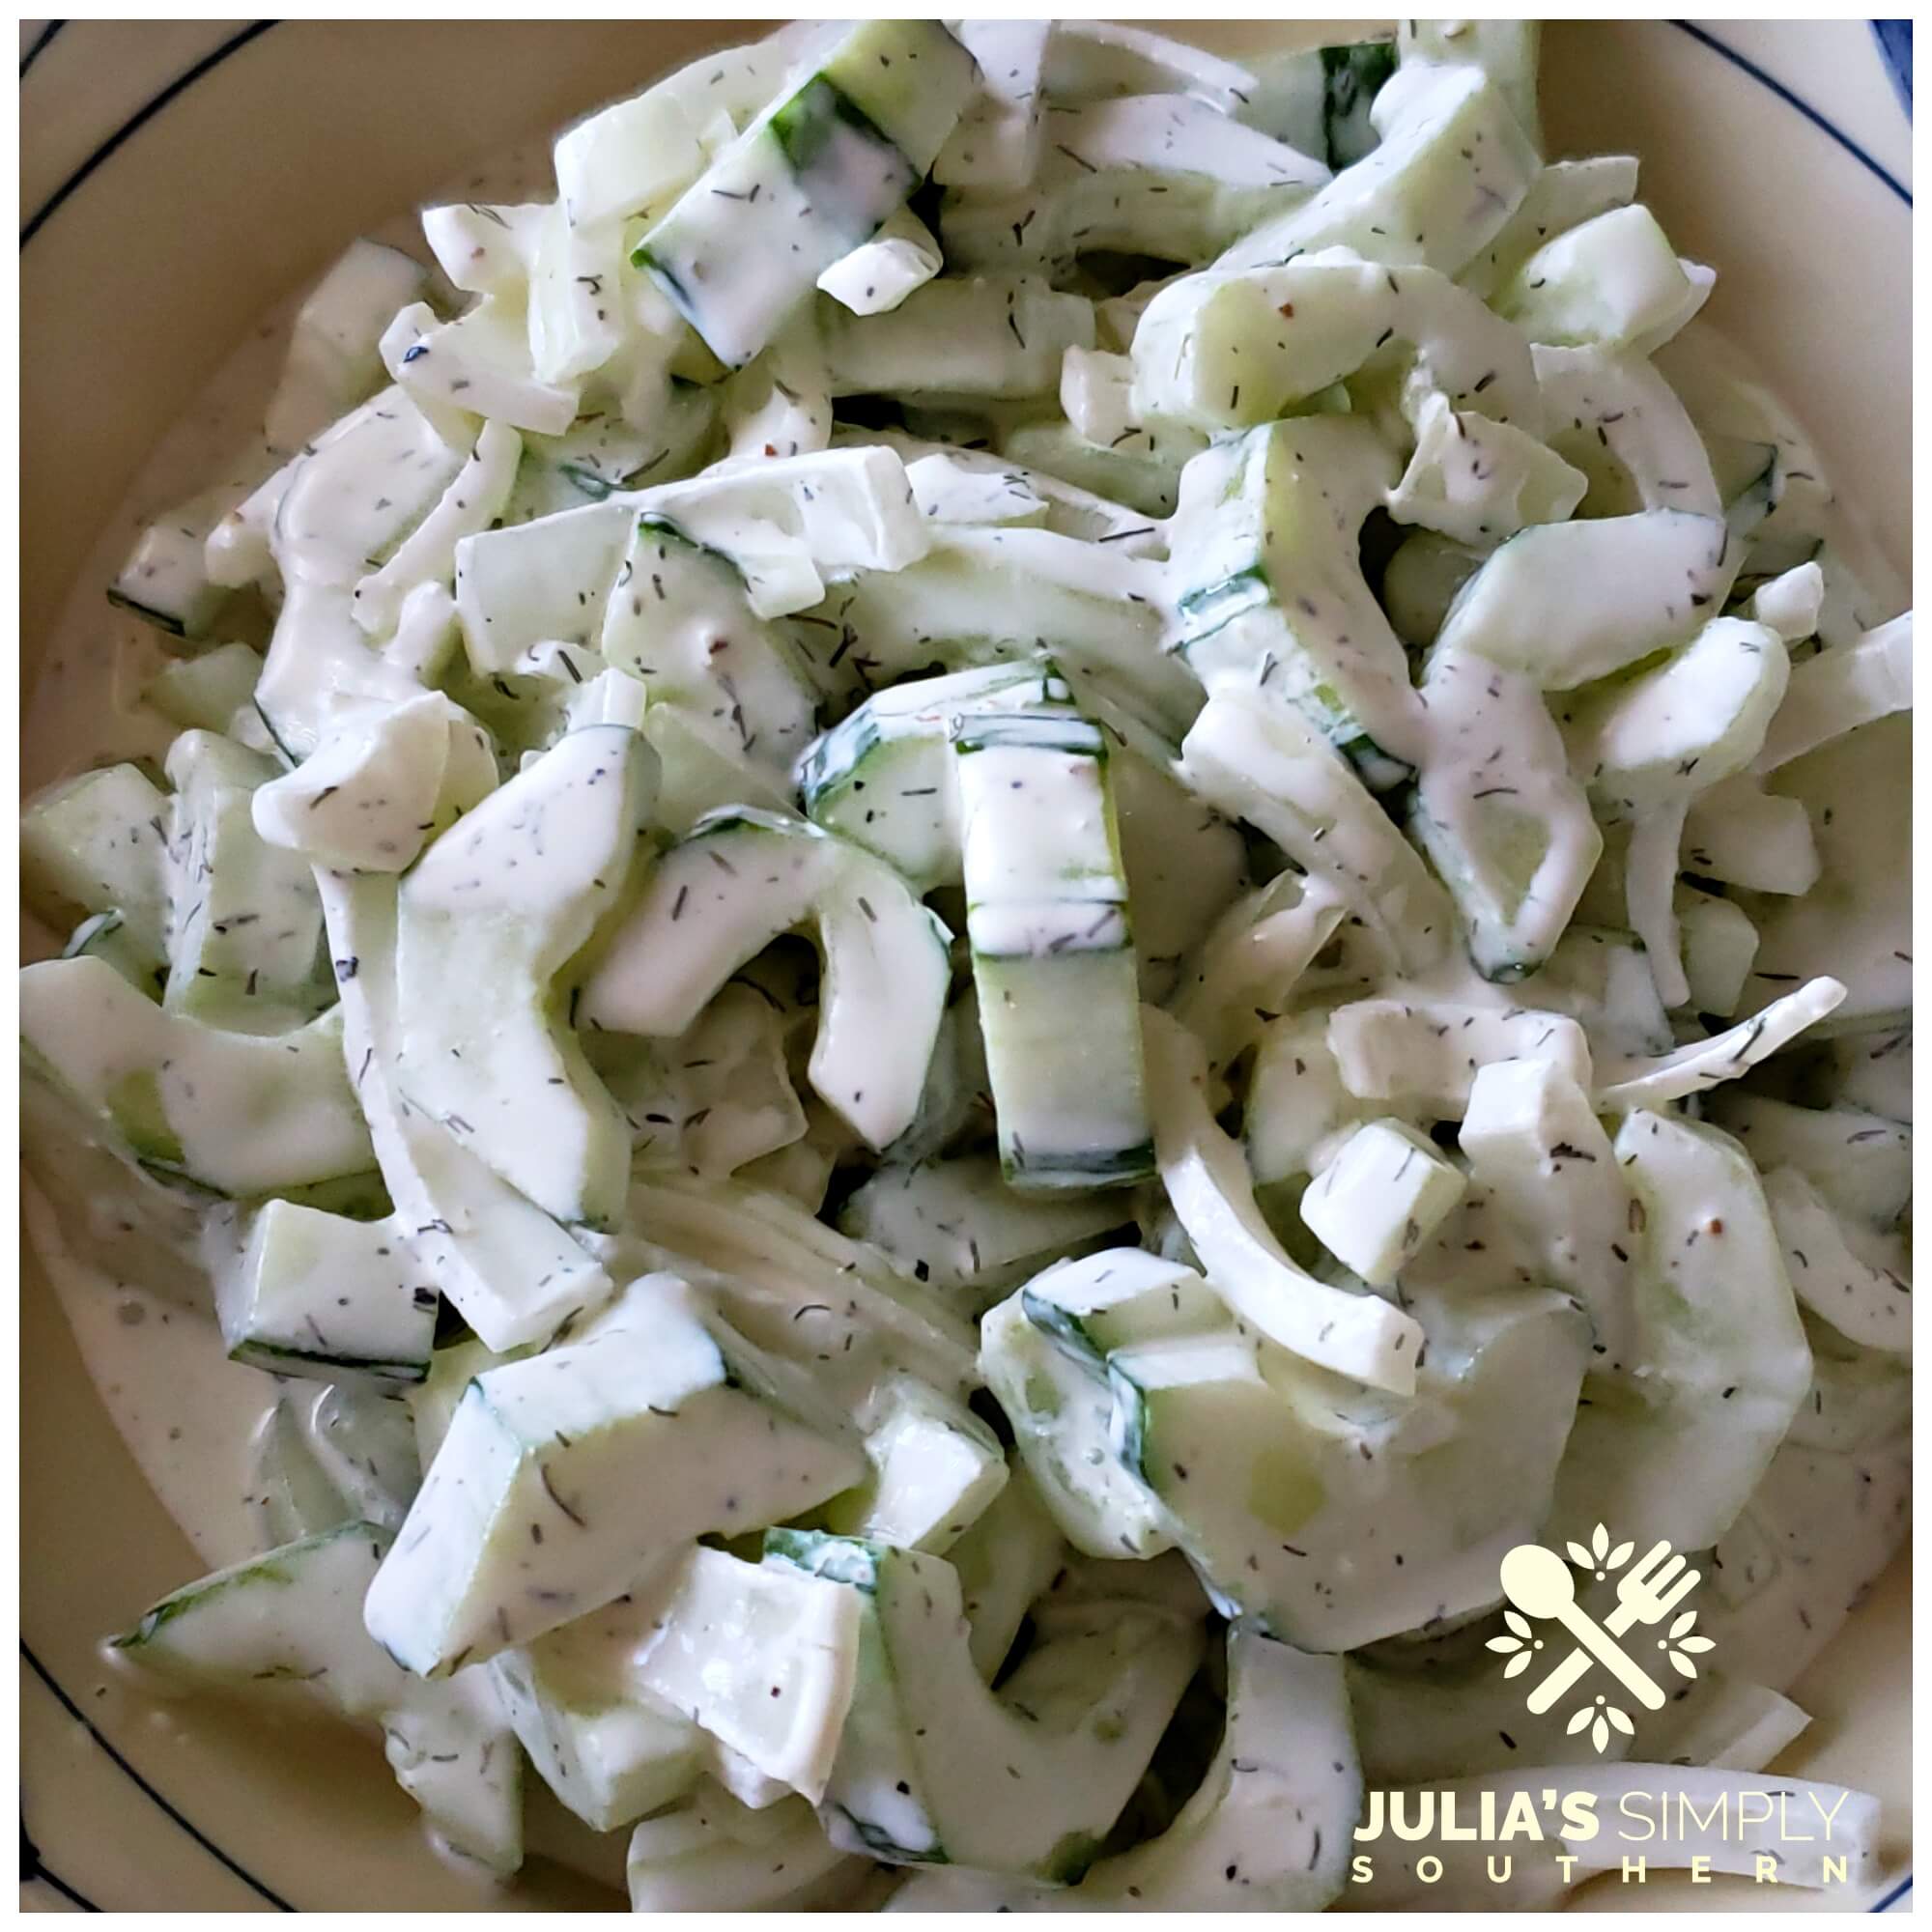 Cool Southern creamy cucumbers in a tangy creamy dressing with onion and dill